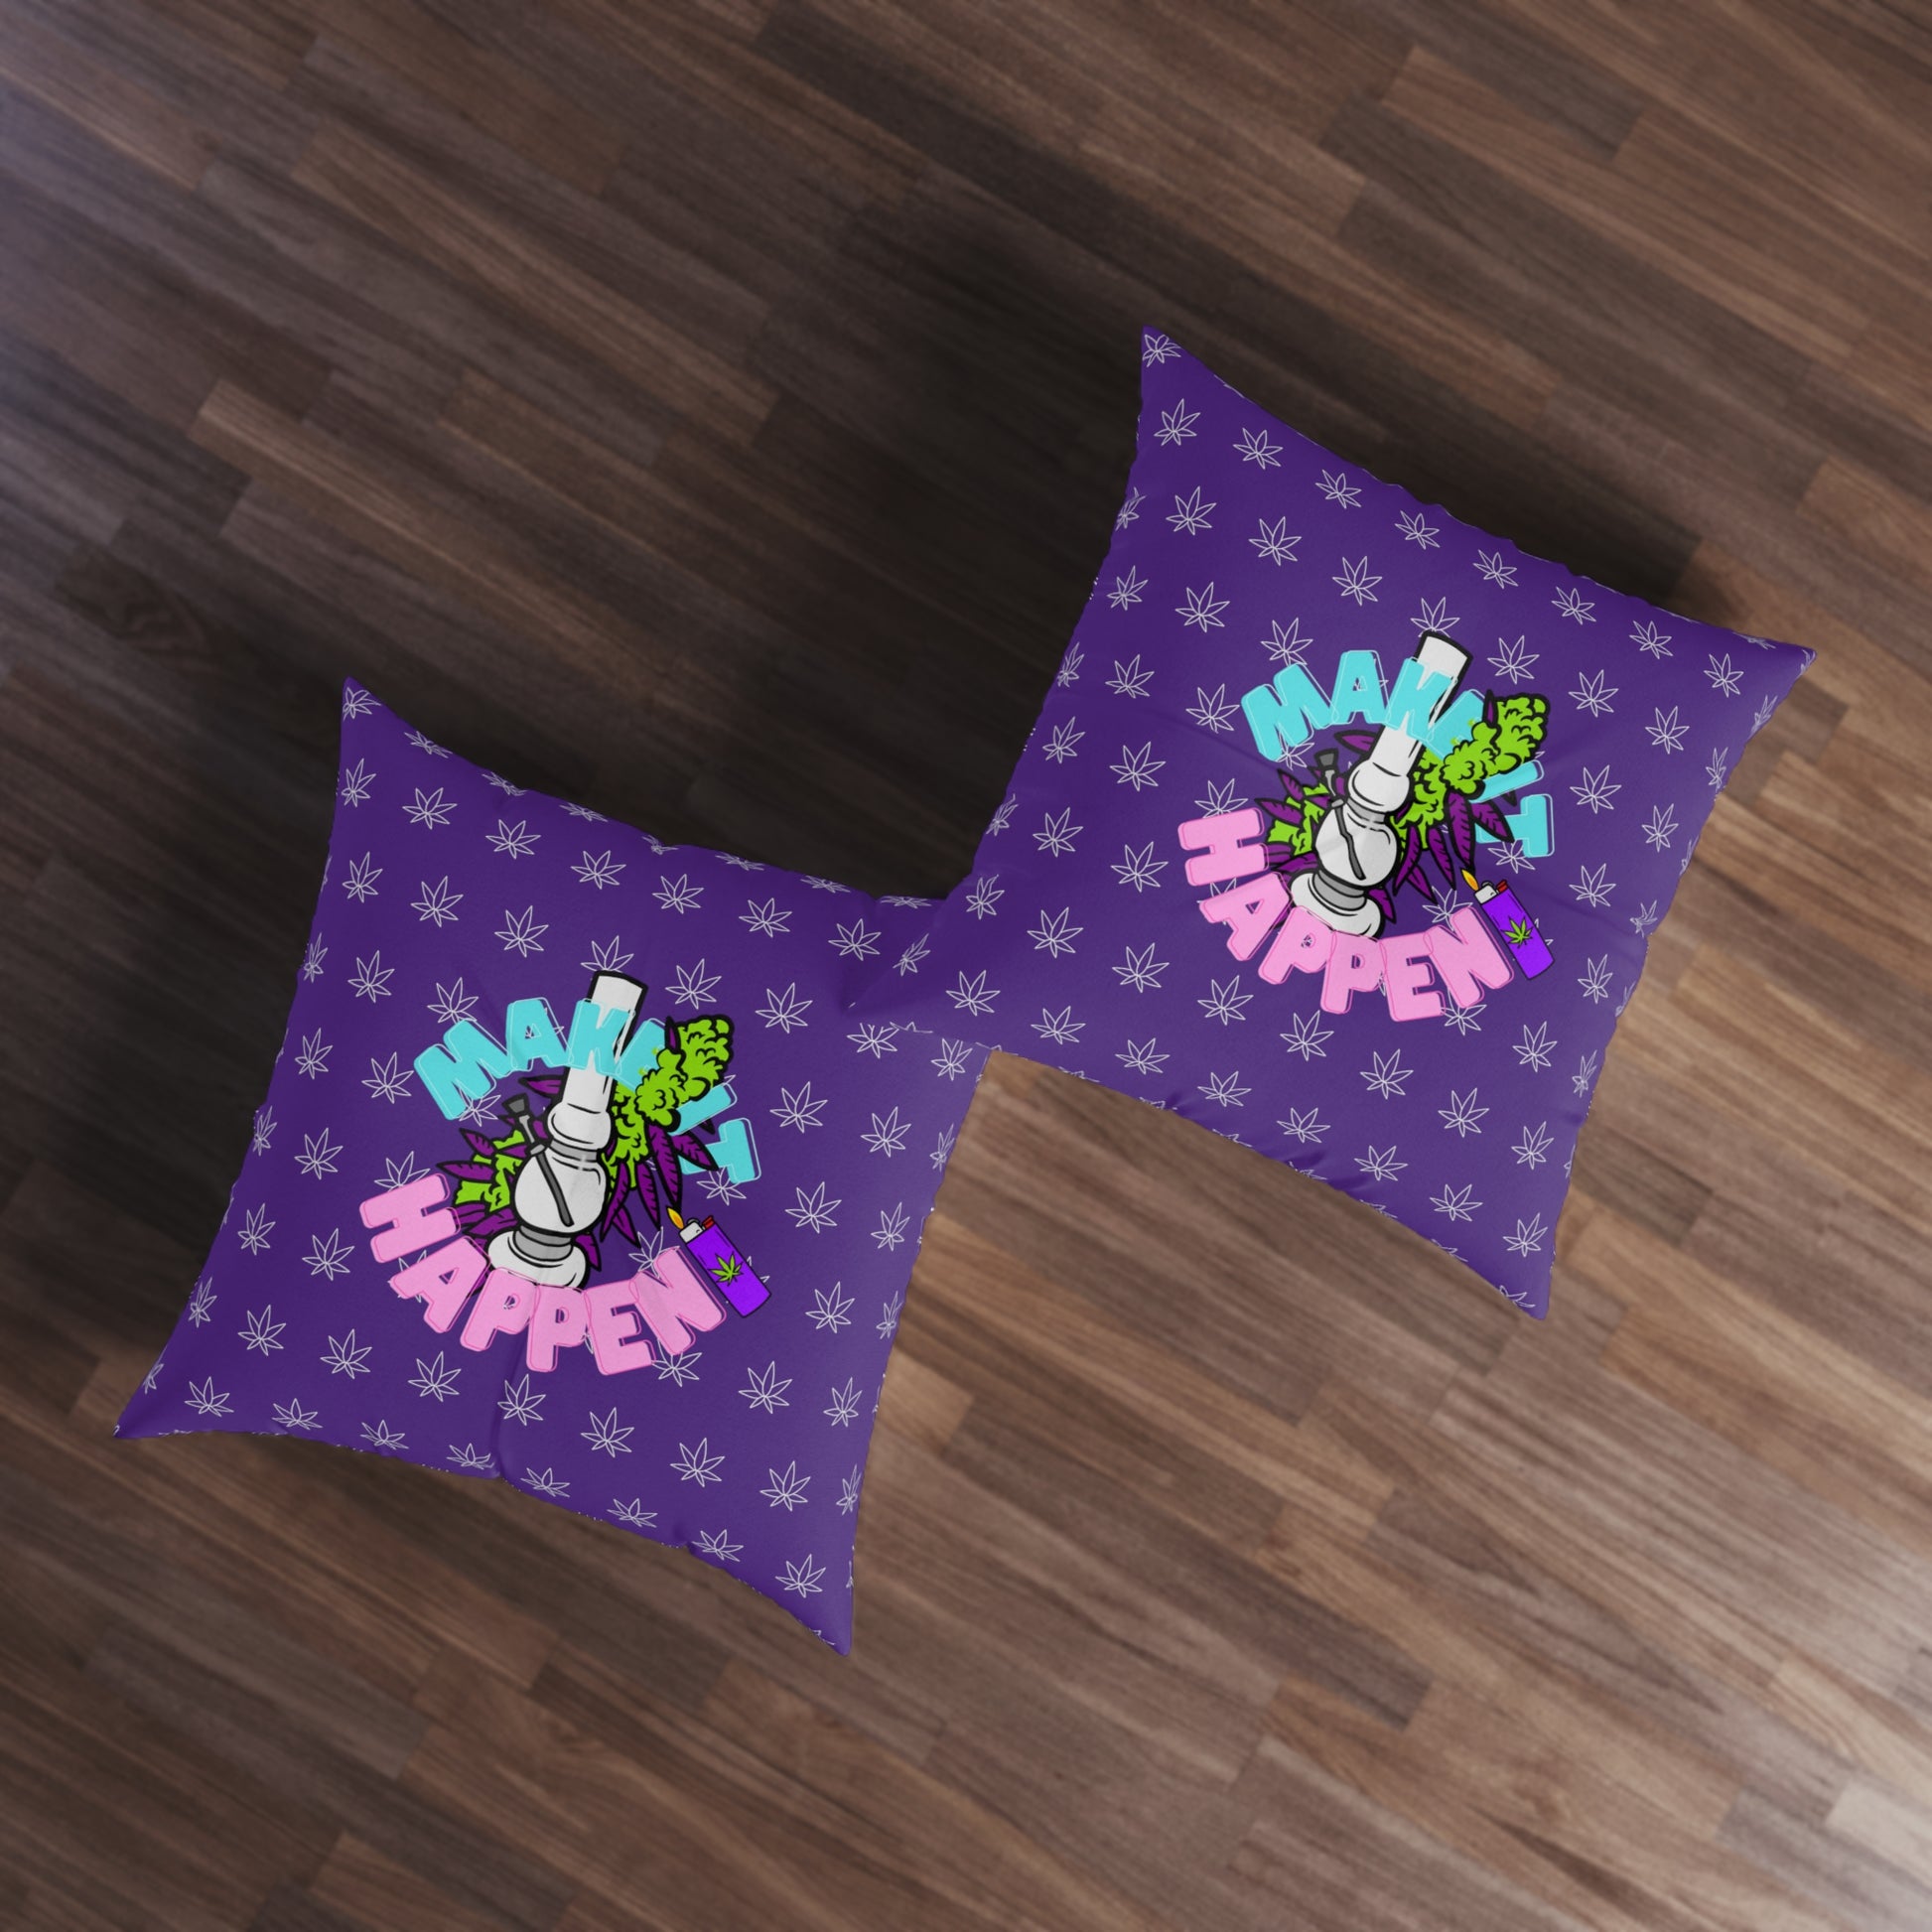 Two purple Make It Happen Cannabis tufted floor pillows with a graphic of a rocket on a wooden floor.